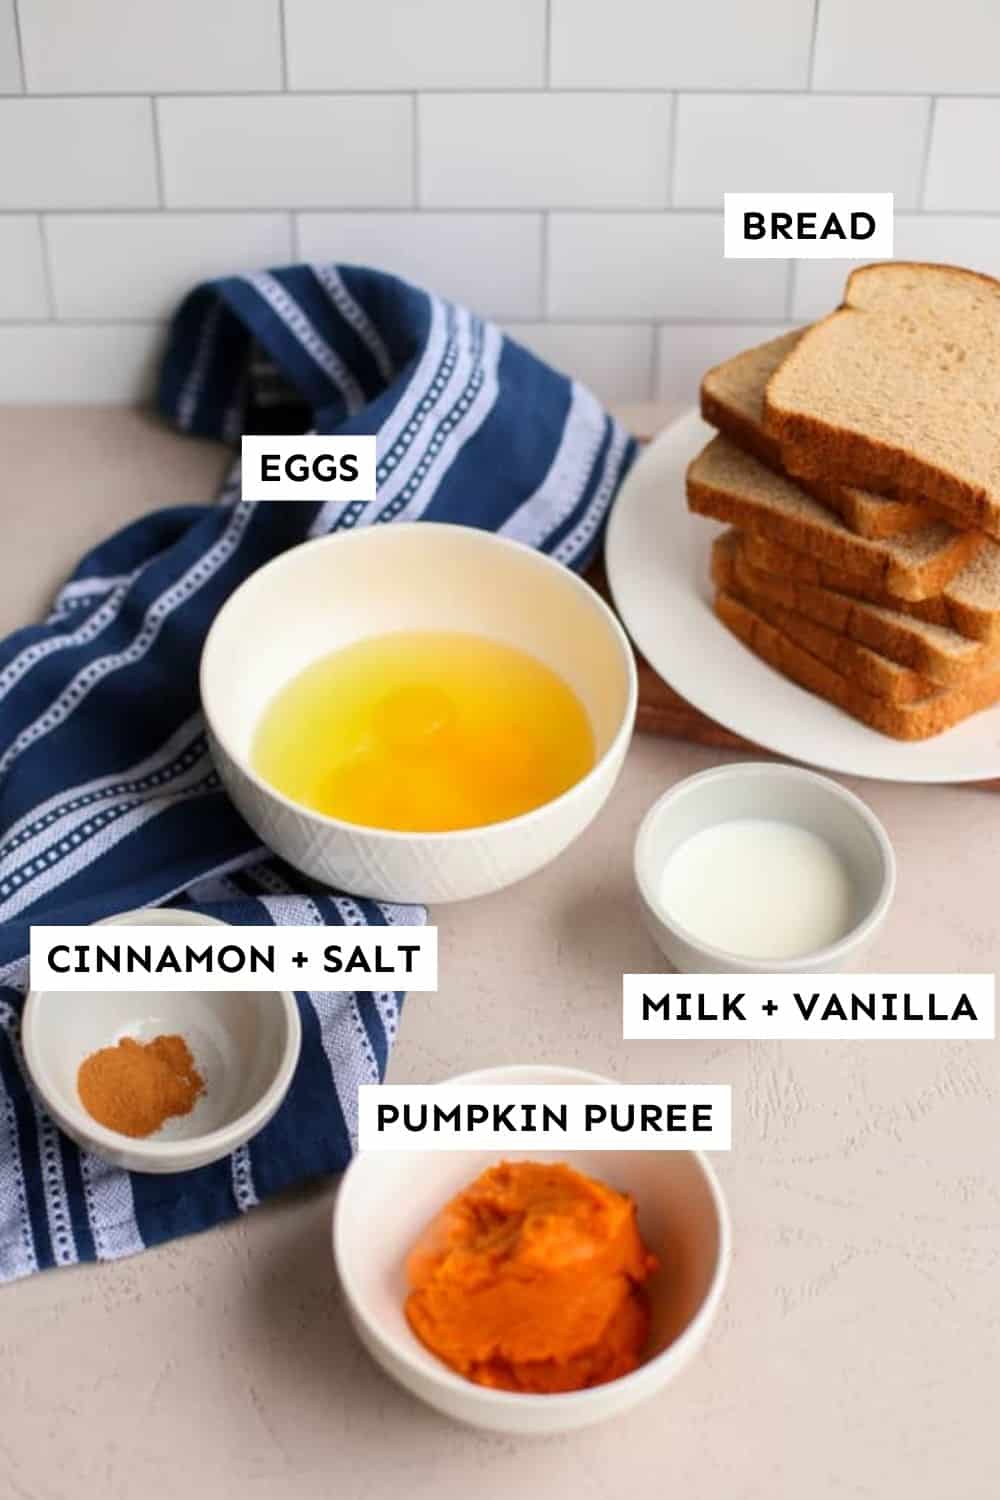 Ingredients for Pumpkin French Toast.